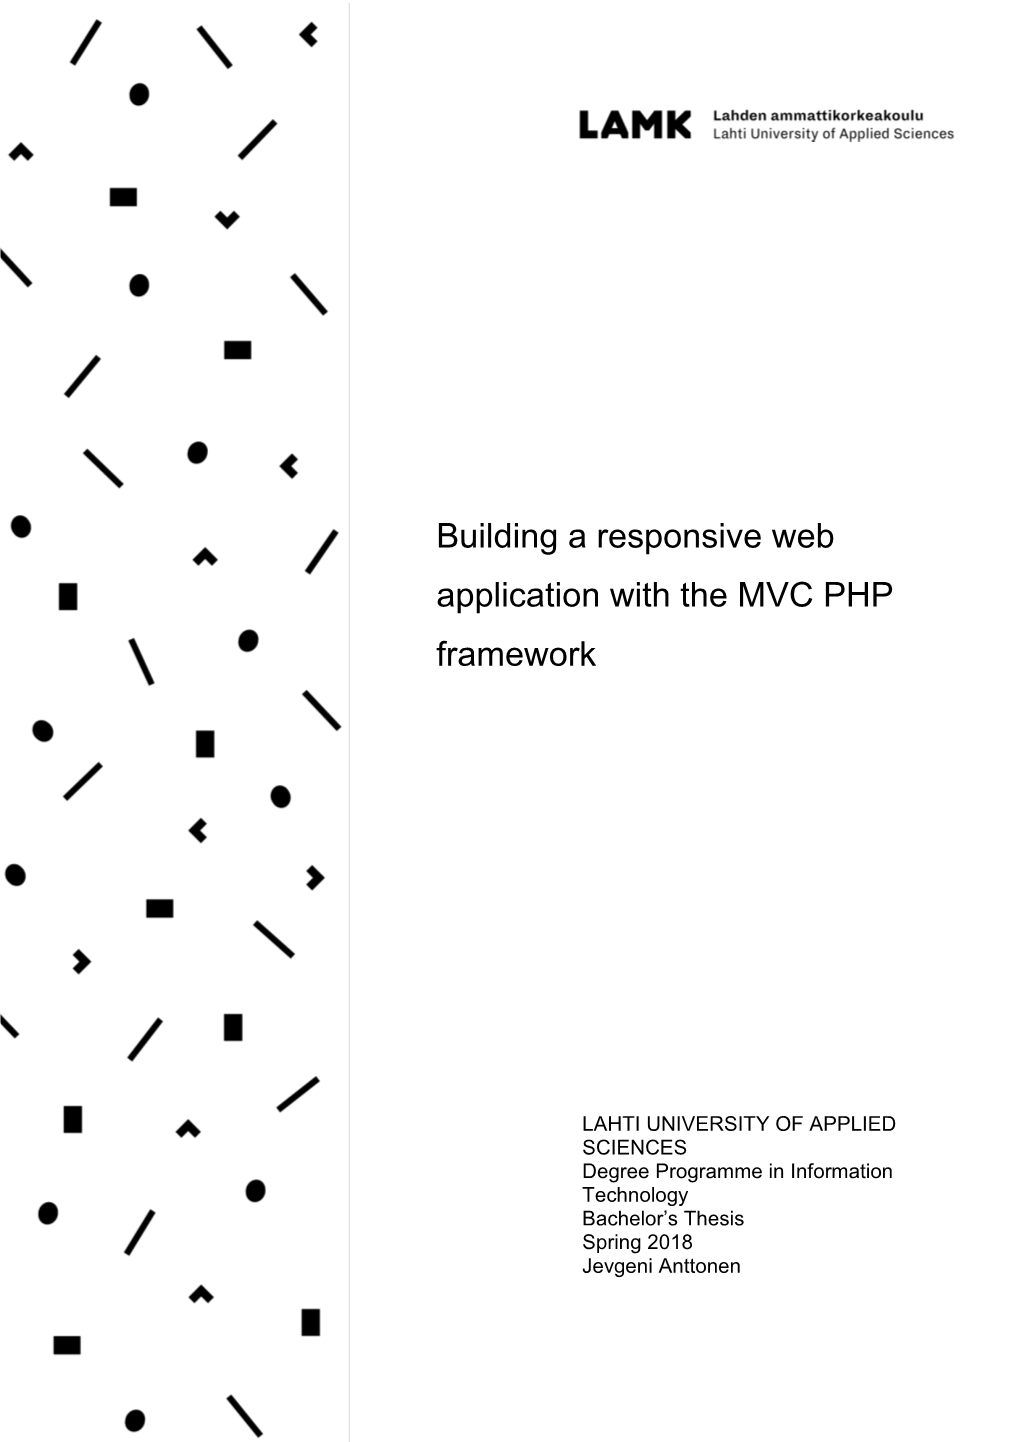 Building a Responsive Web Application with the MVC PHP Framework